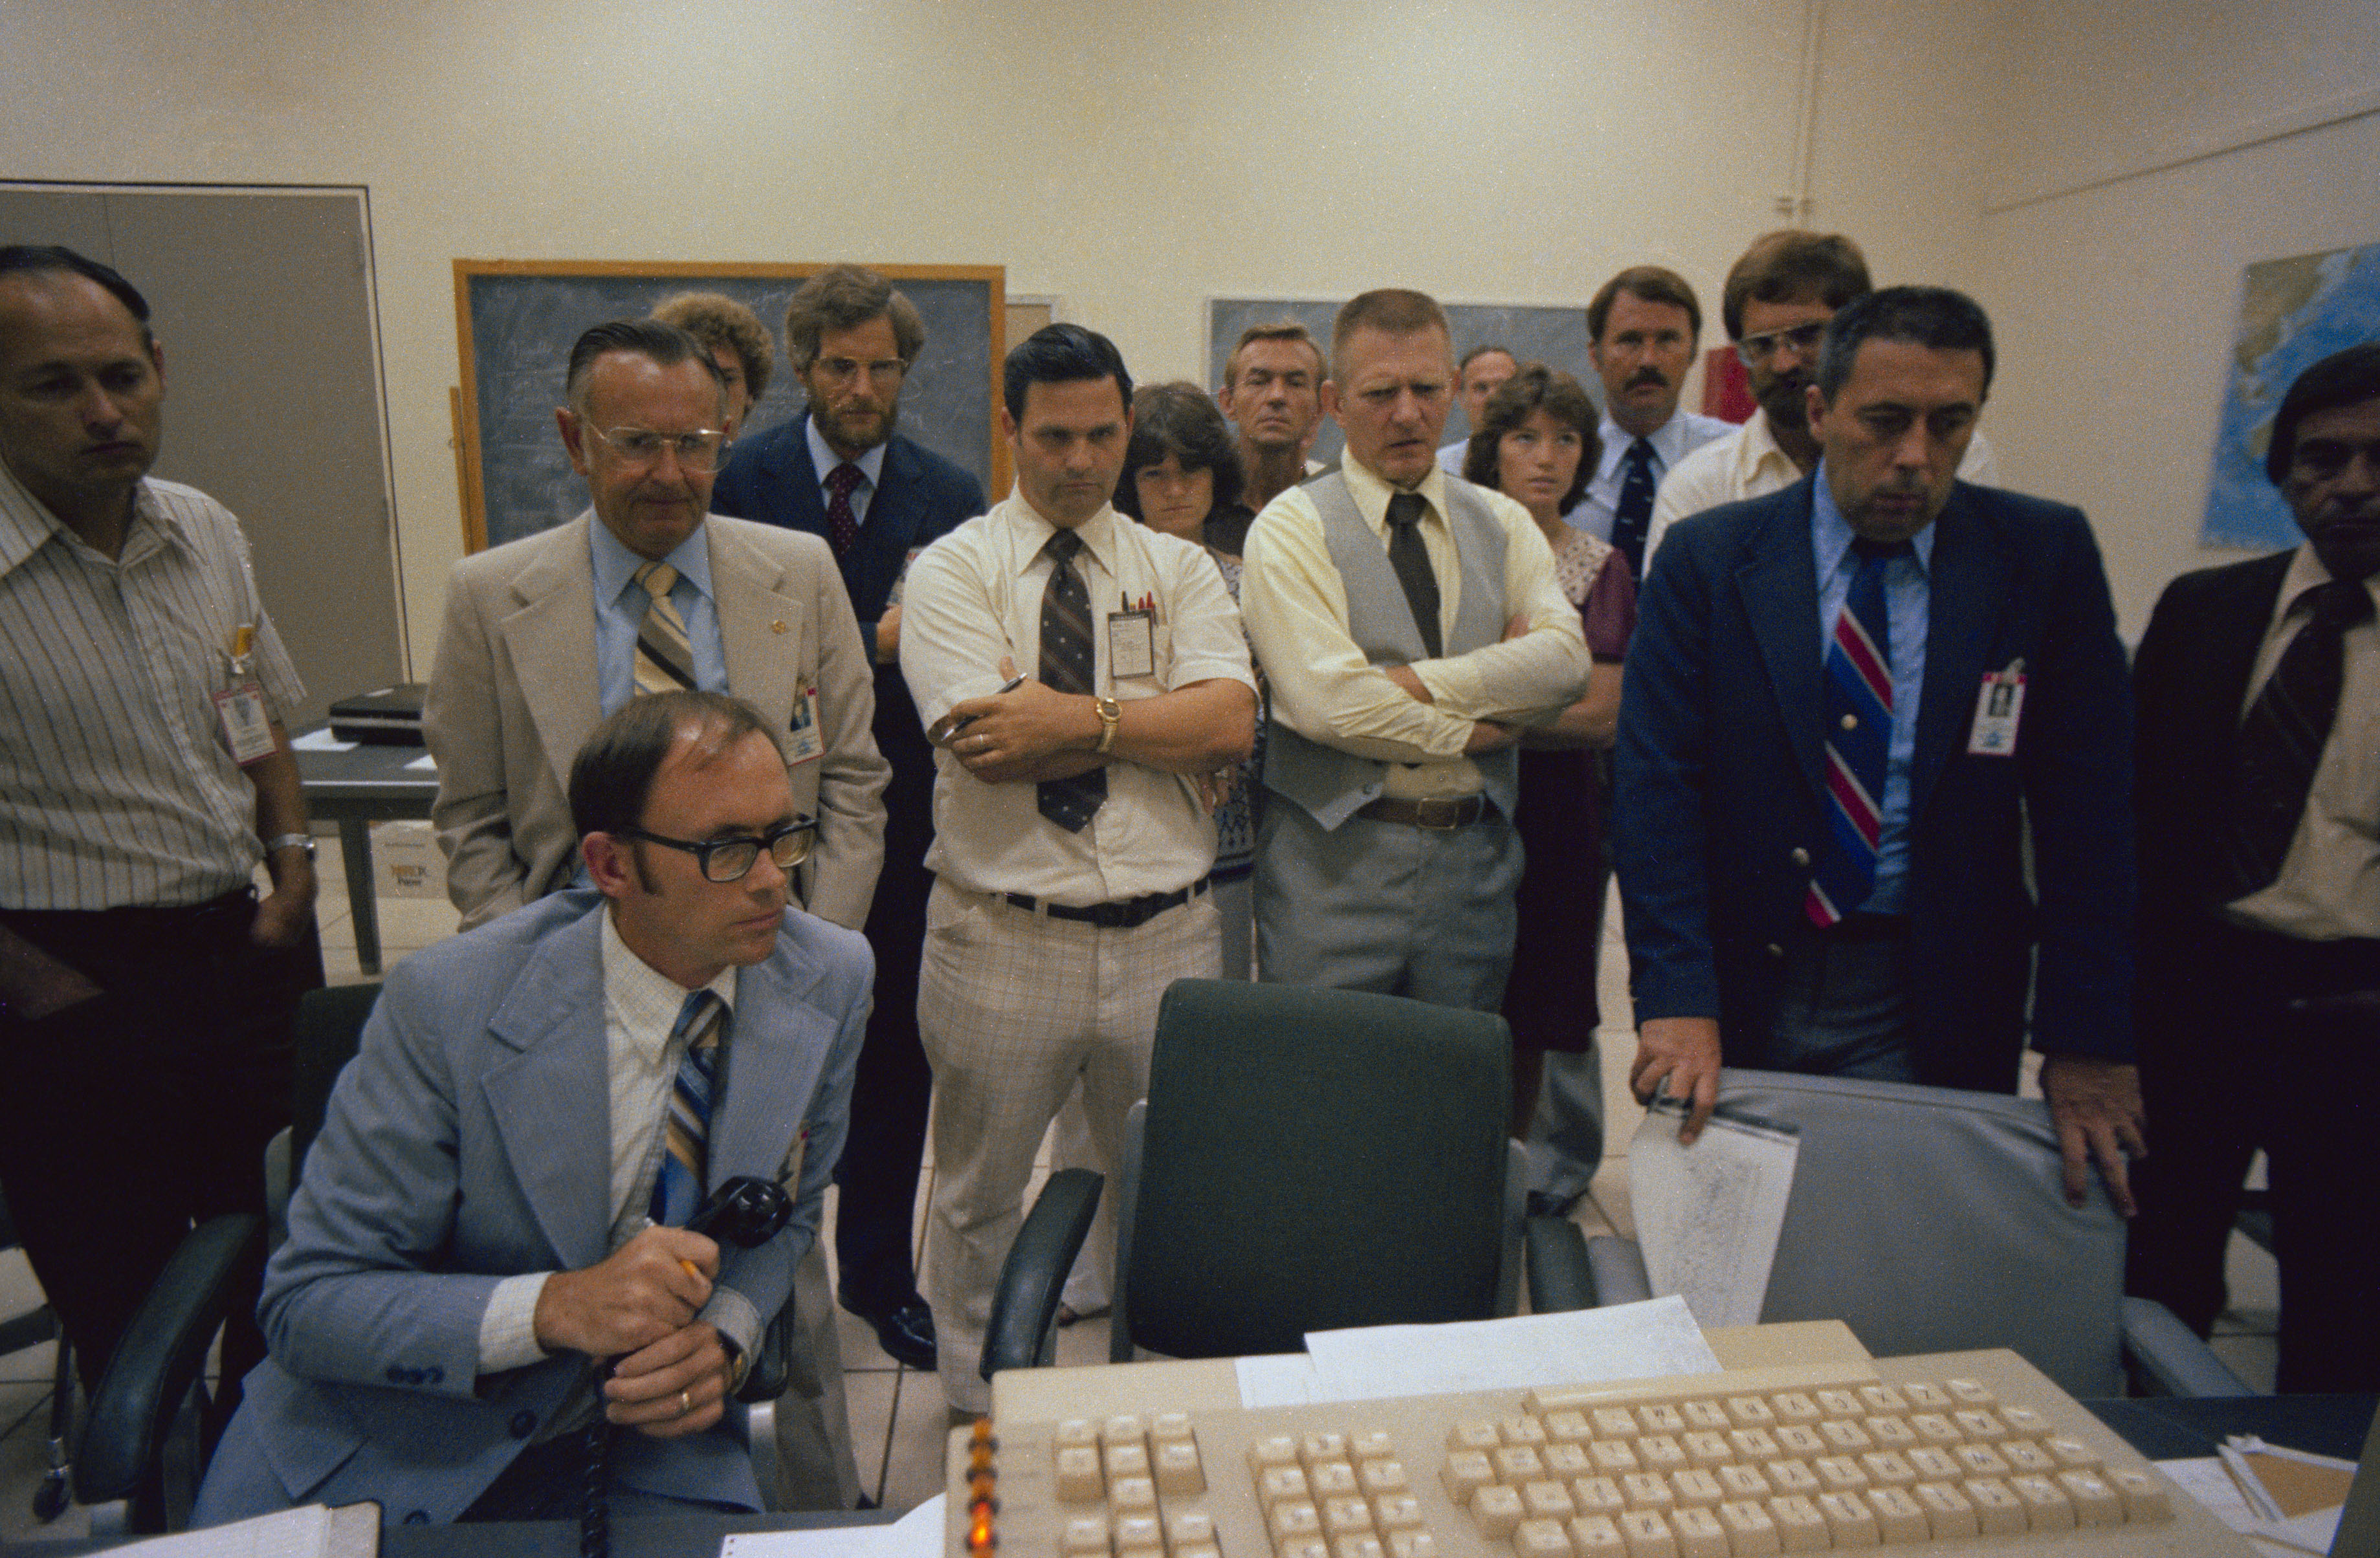 Managers, flight directors, and astronauts monitor Skylab’s reentry from Mission Control at NASA’s Johnson Space Center in Houston